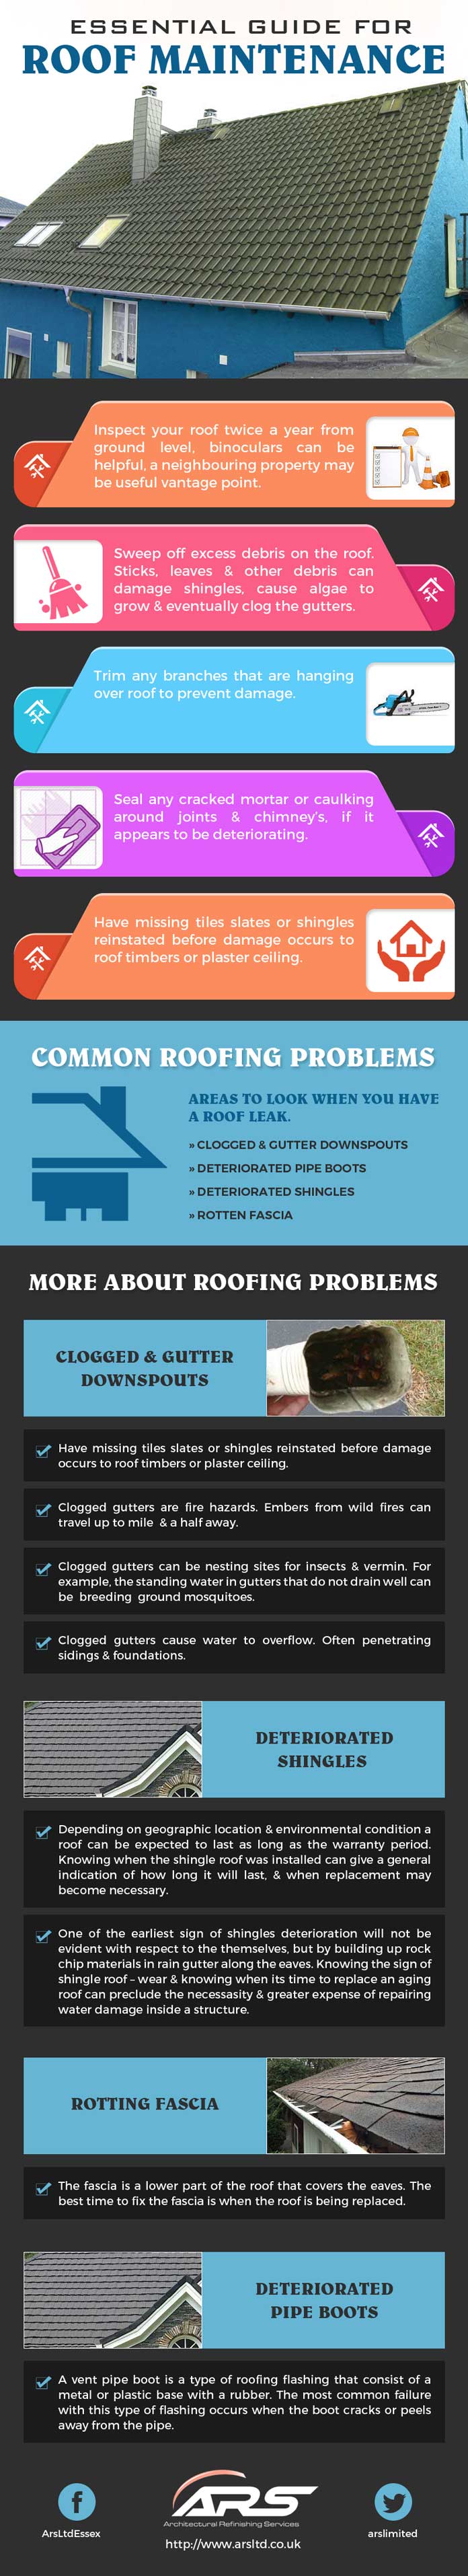 Essential Guide for Roof Maintenance